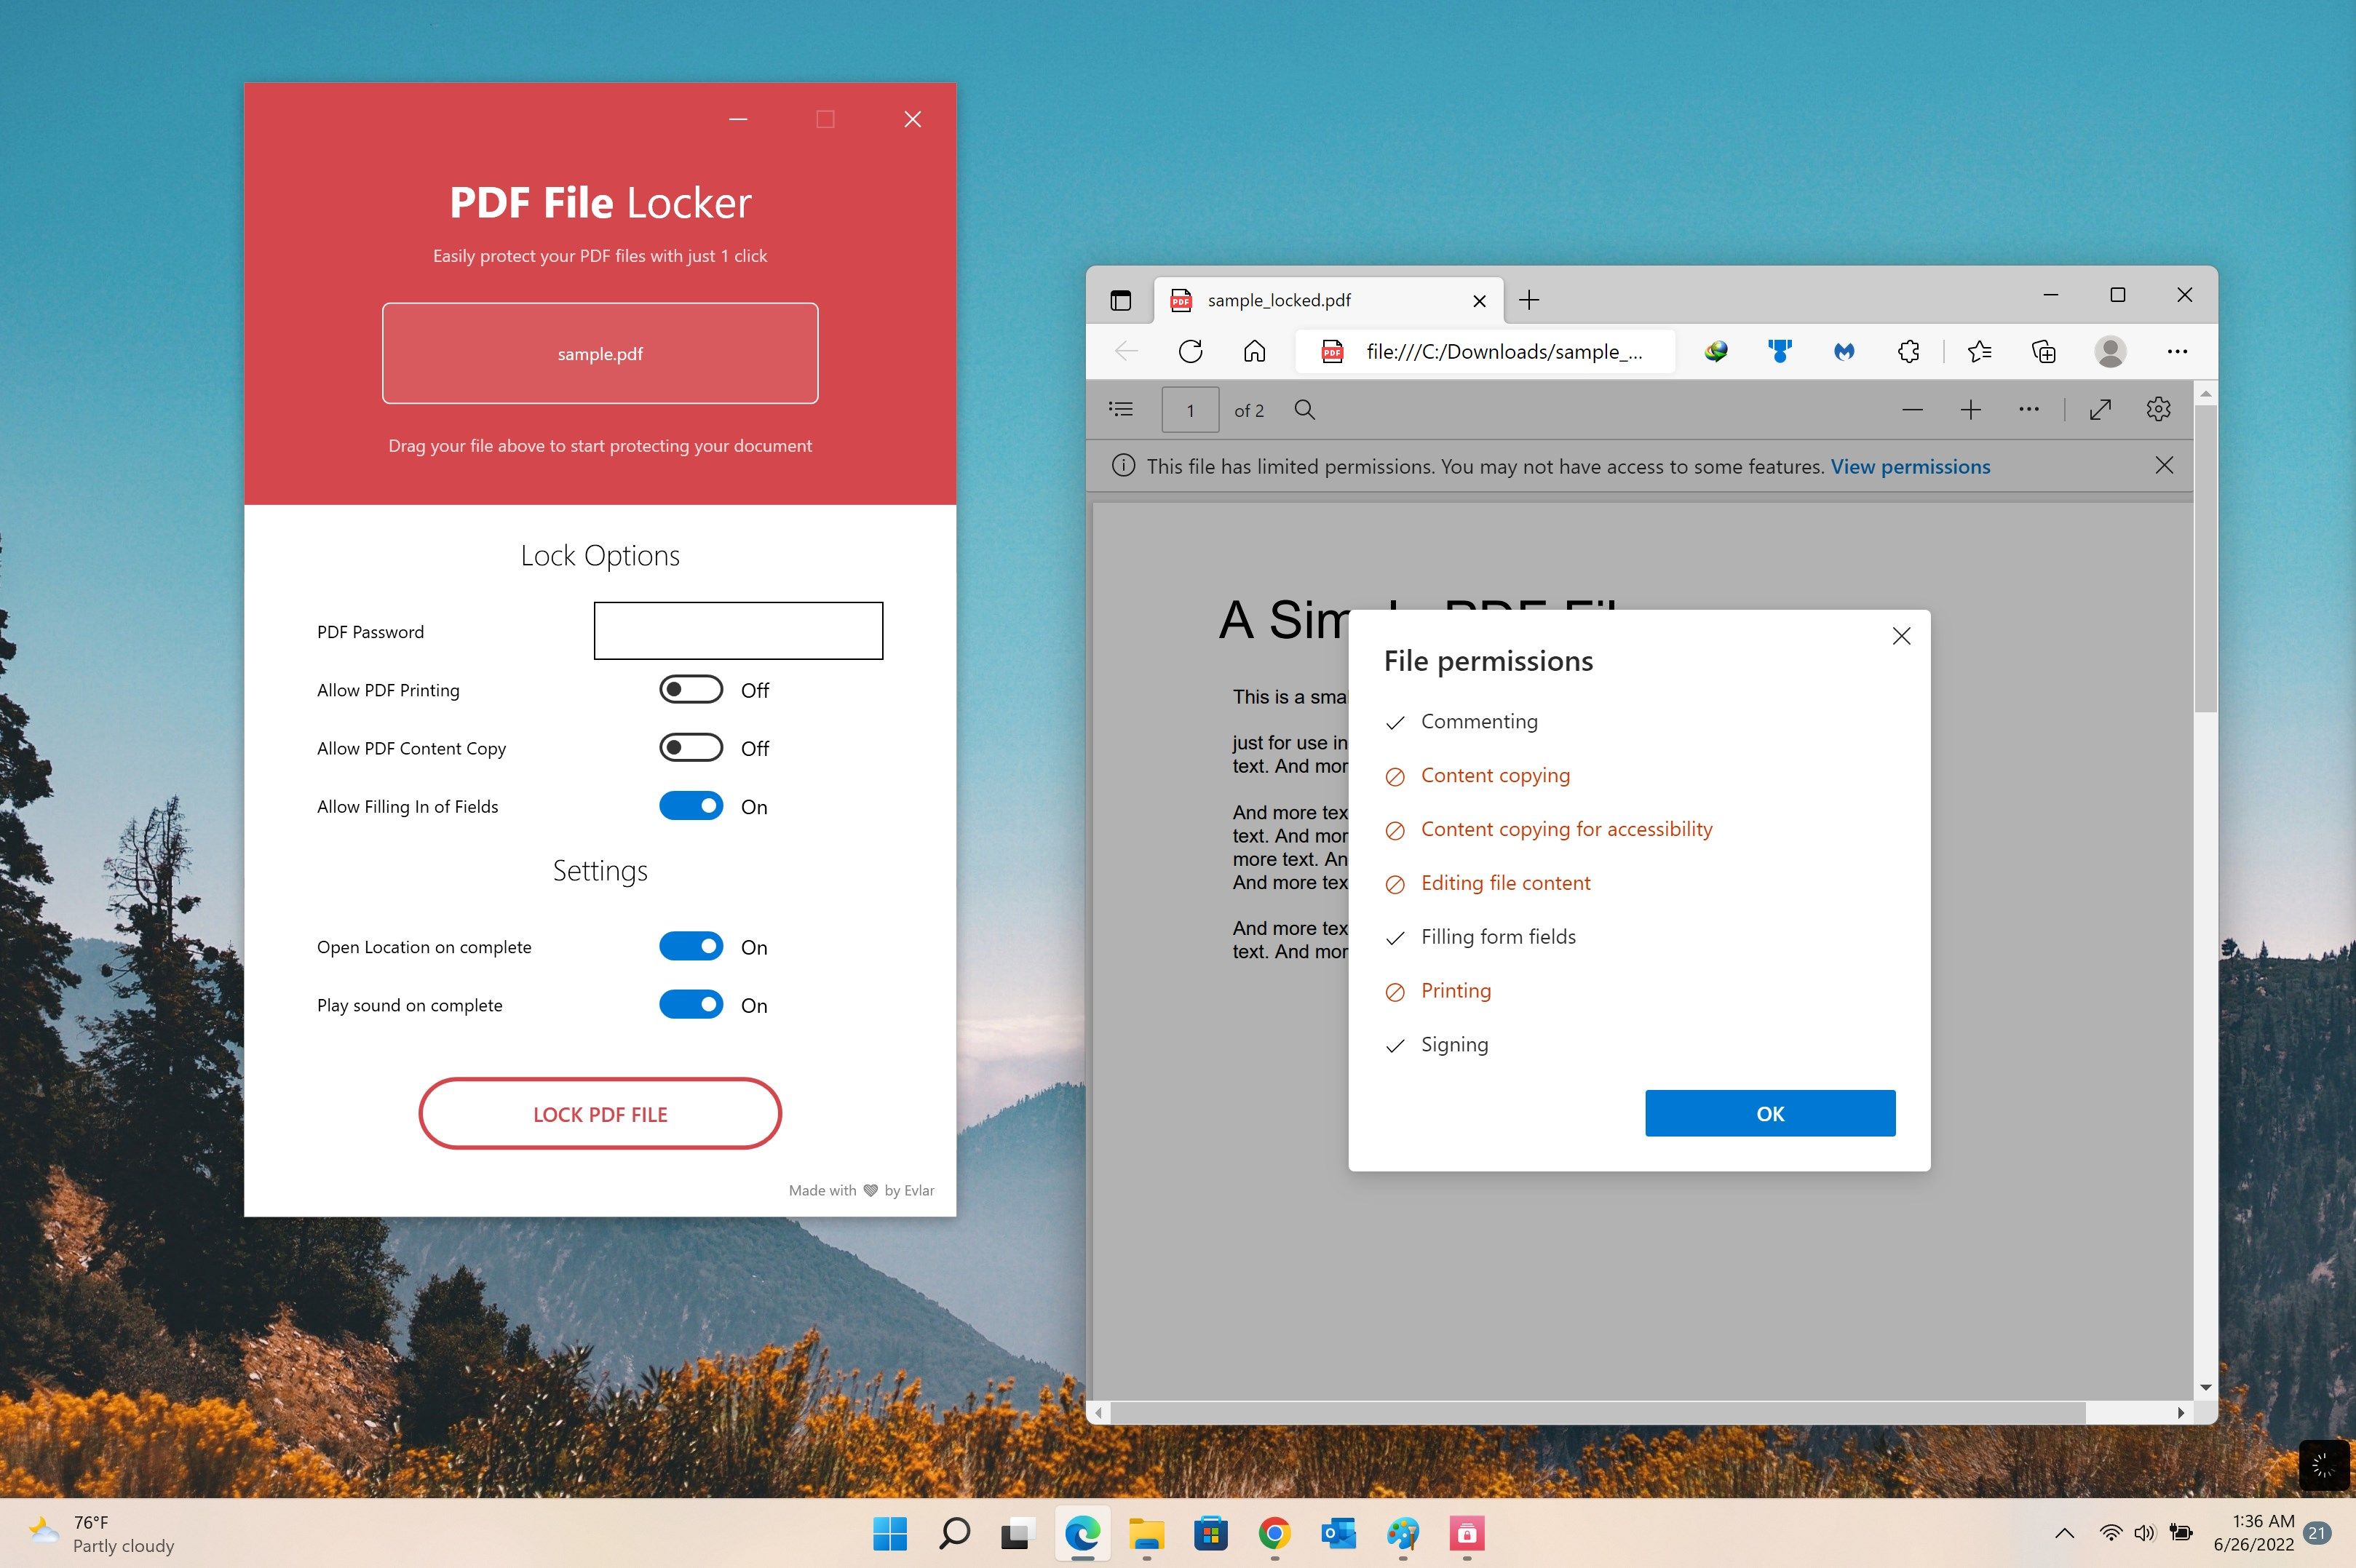 Enable permissions for your PDF files